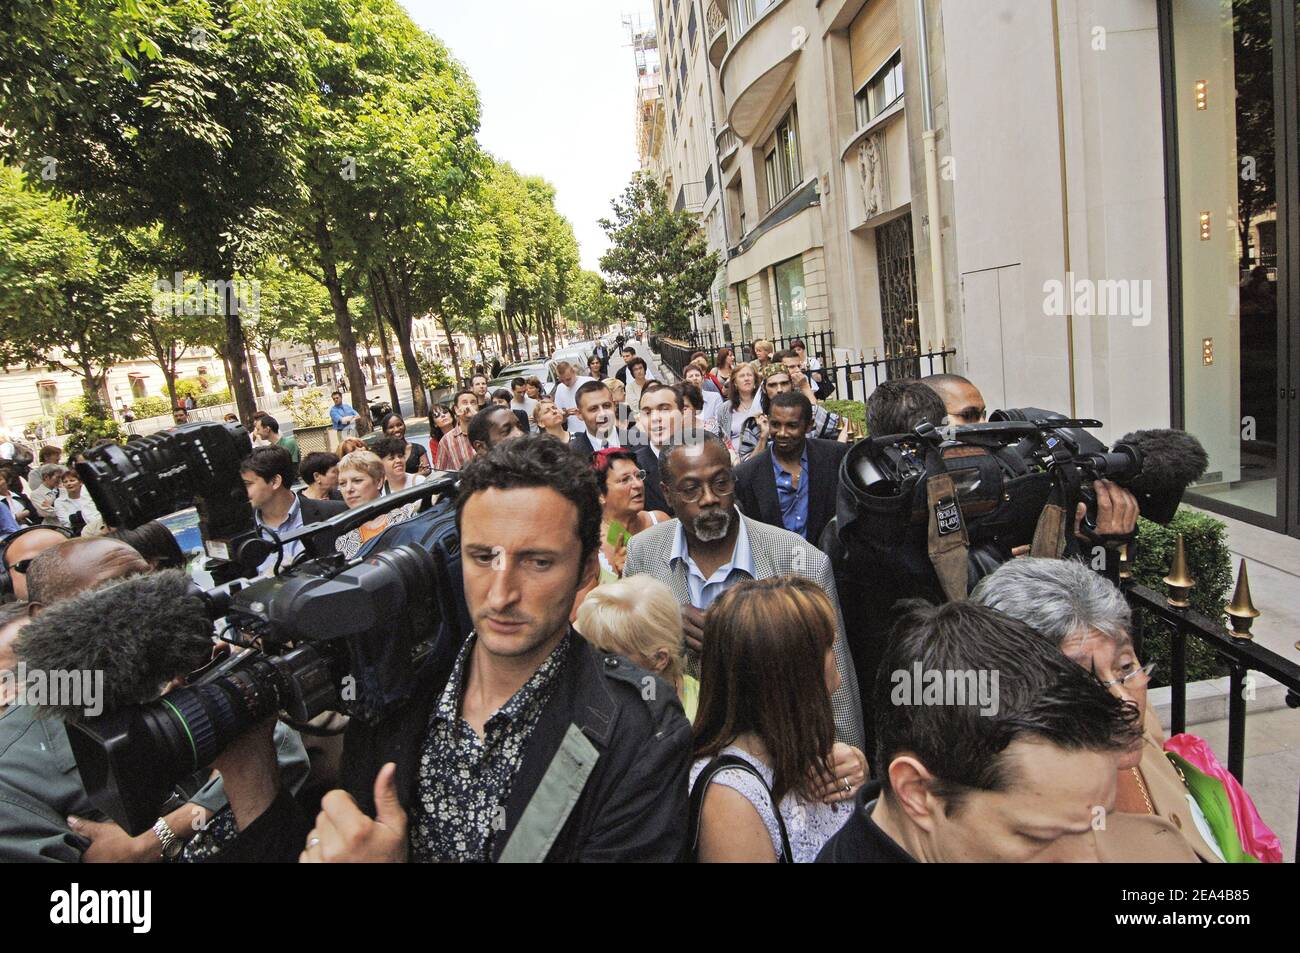 The LVMH Louis Vuitton Moet Hennessy's headquarters in Paris, France, on  June 10, 2005. La Samaritaine employees protest against an announced  six-year closure of La Samaritaine stores due to fire risk. The